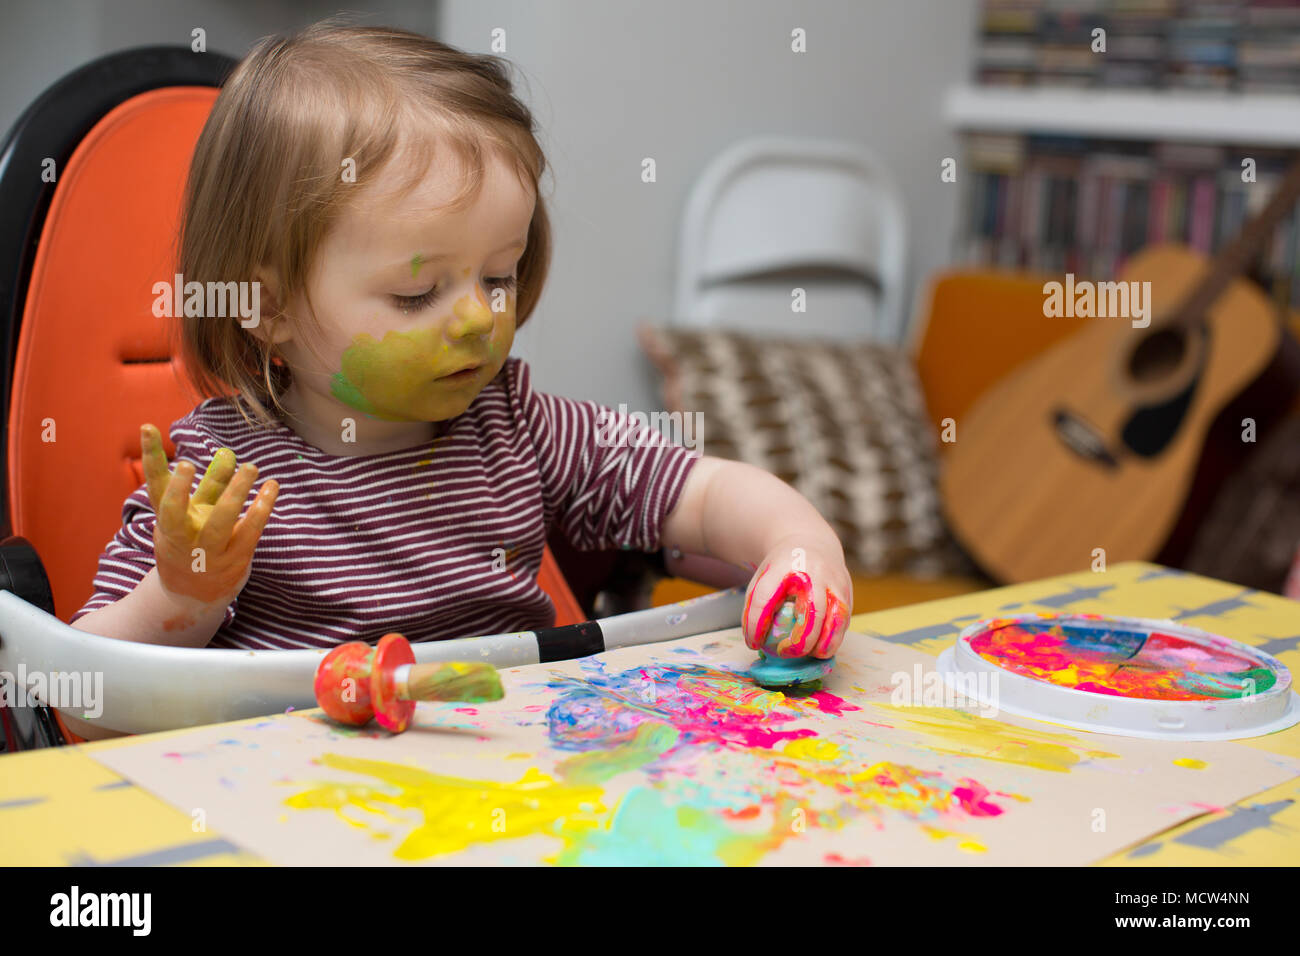 Toddler painting at home Stock Photo